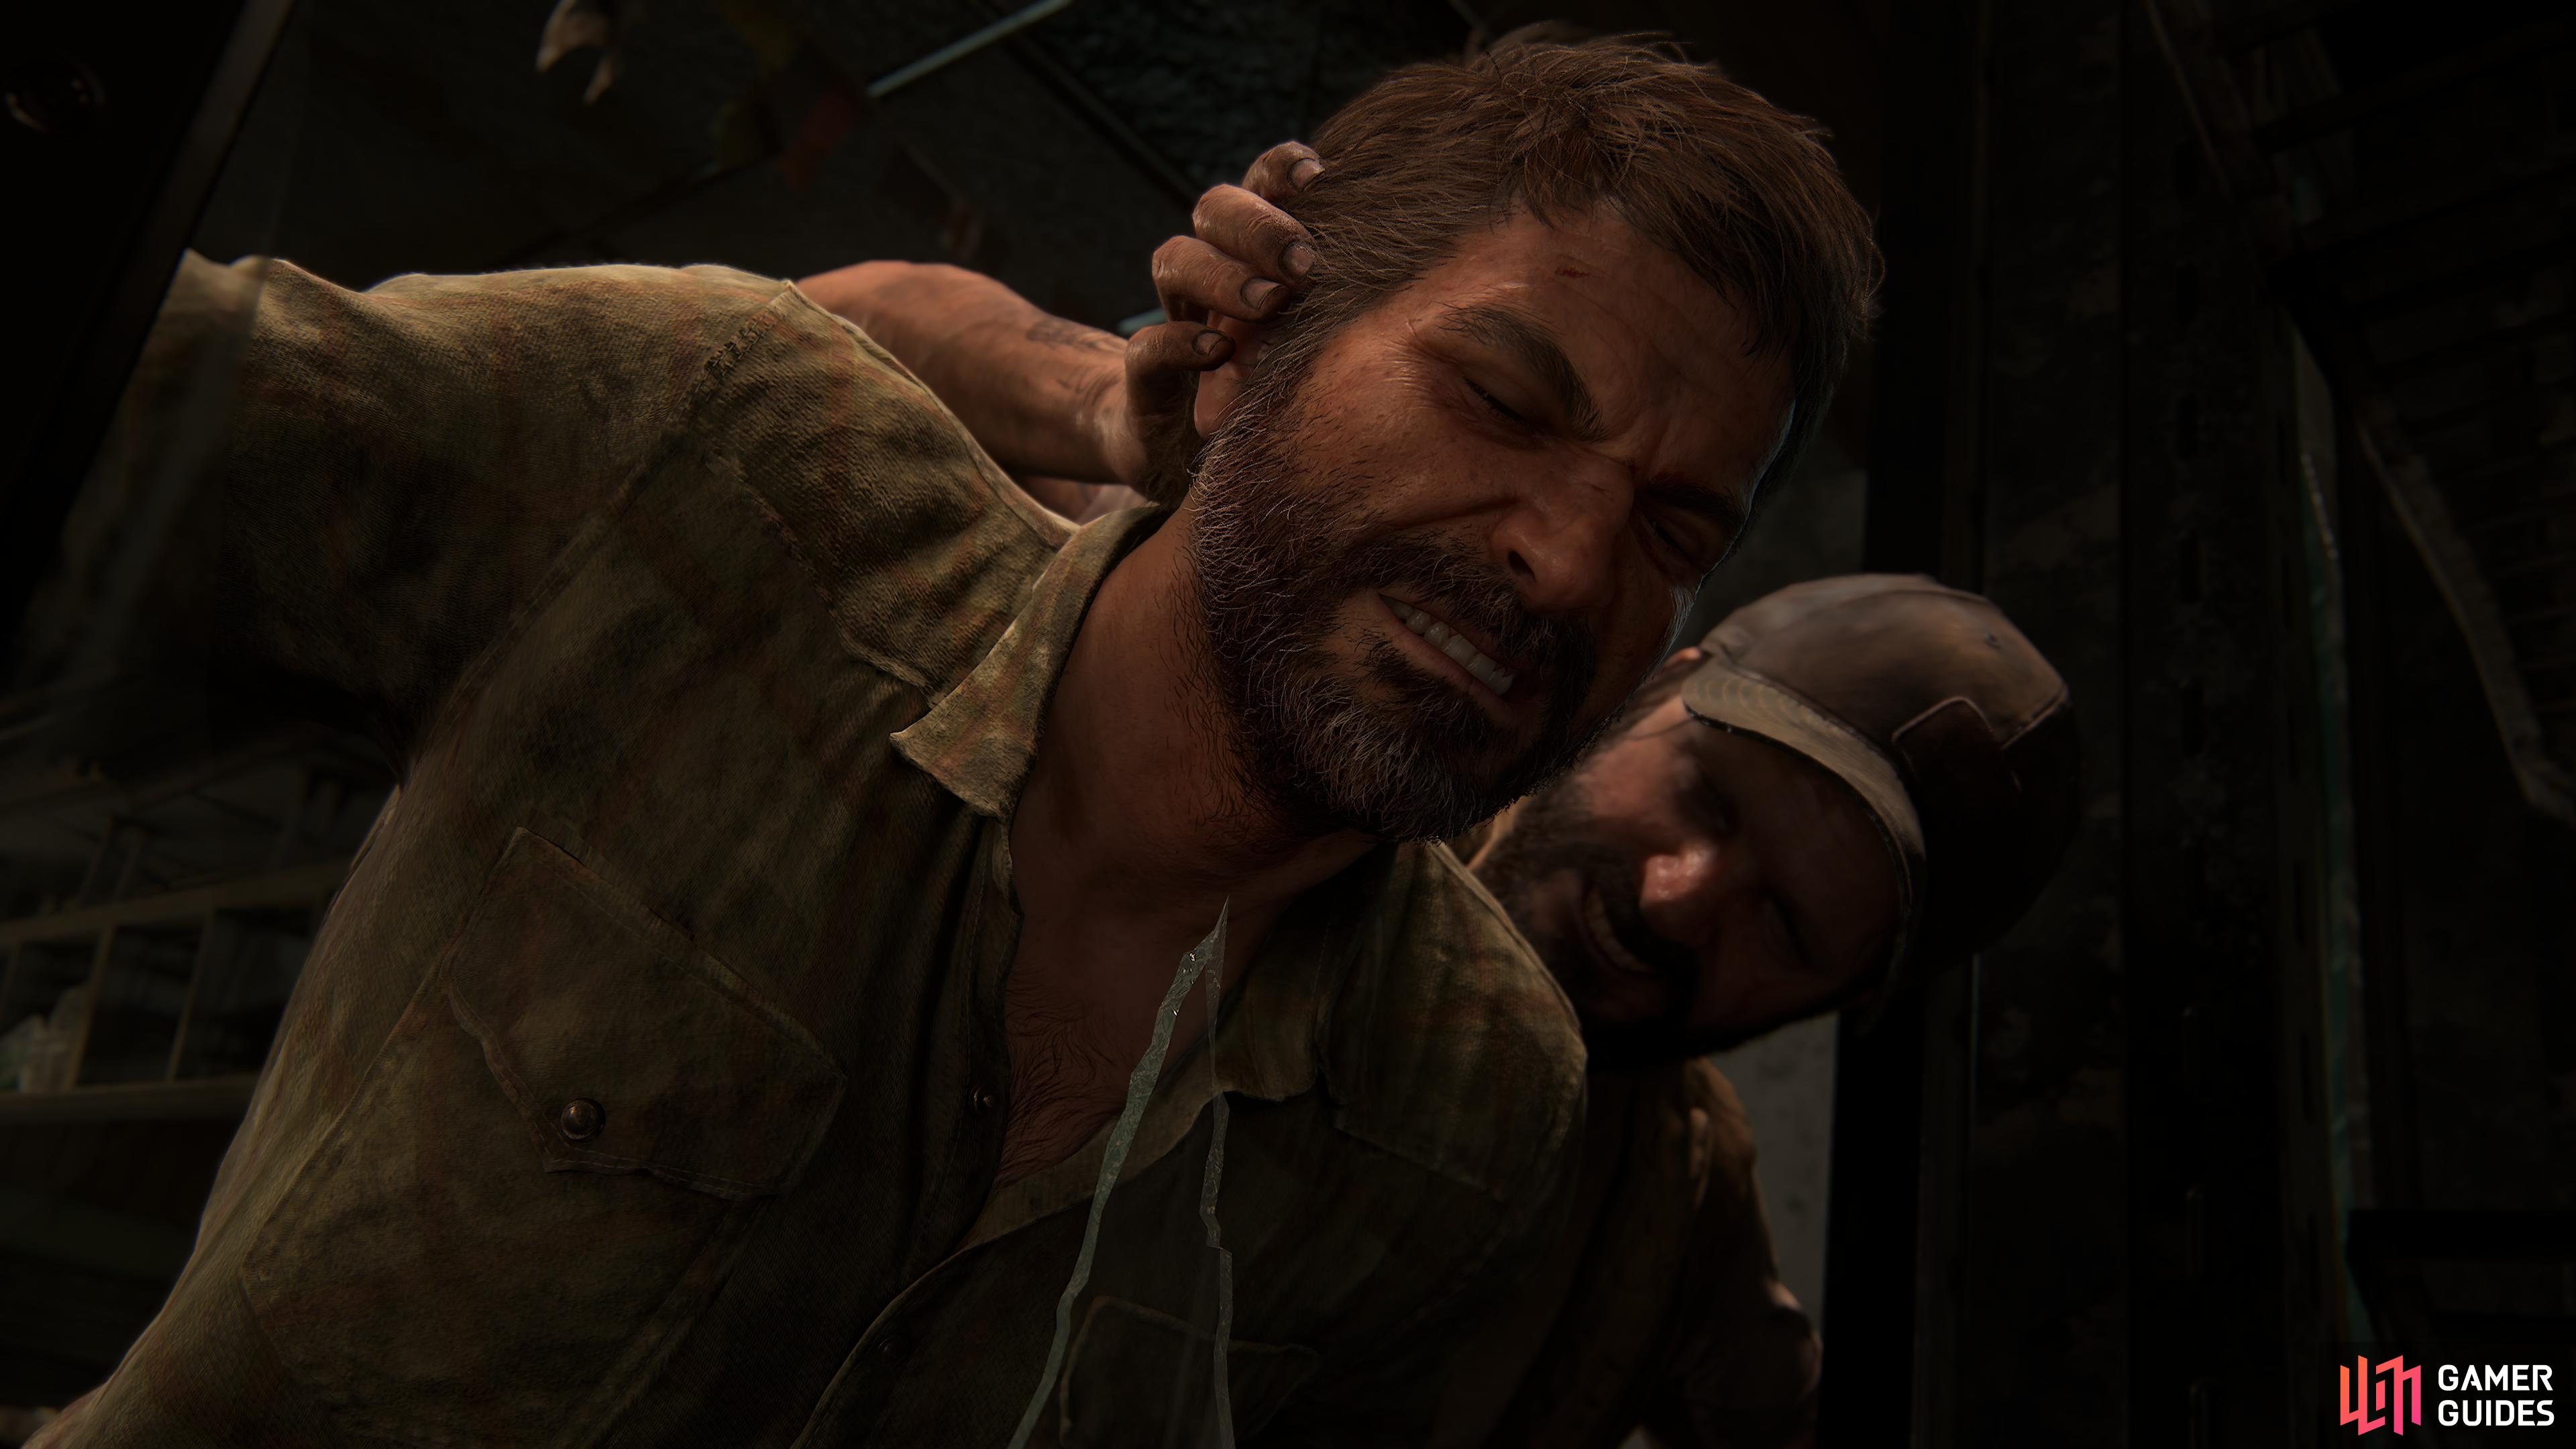 Joel came very close to death. 